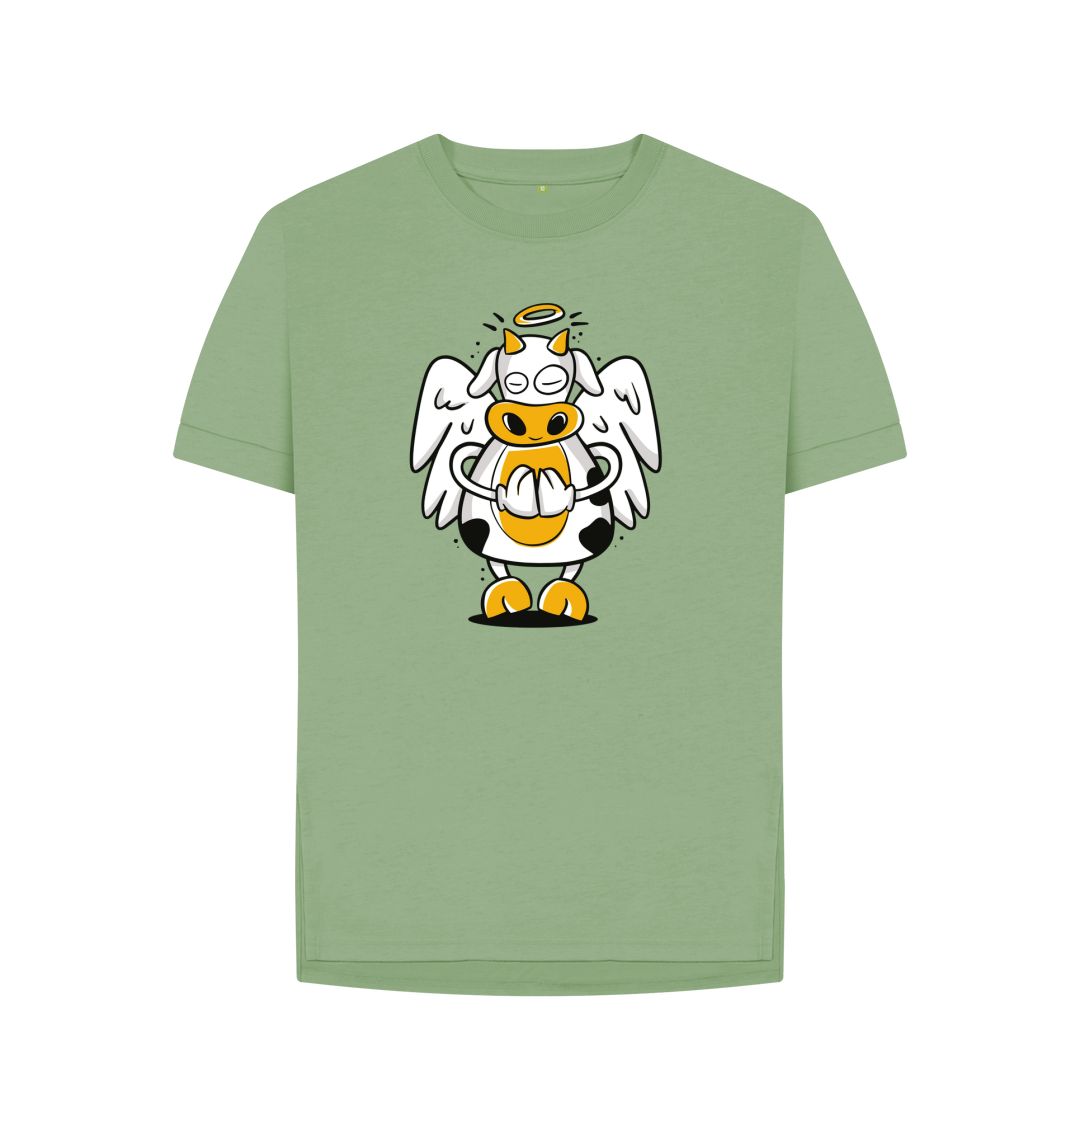 Sage Angelic Cow Women's Relaxed Fit Tee